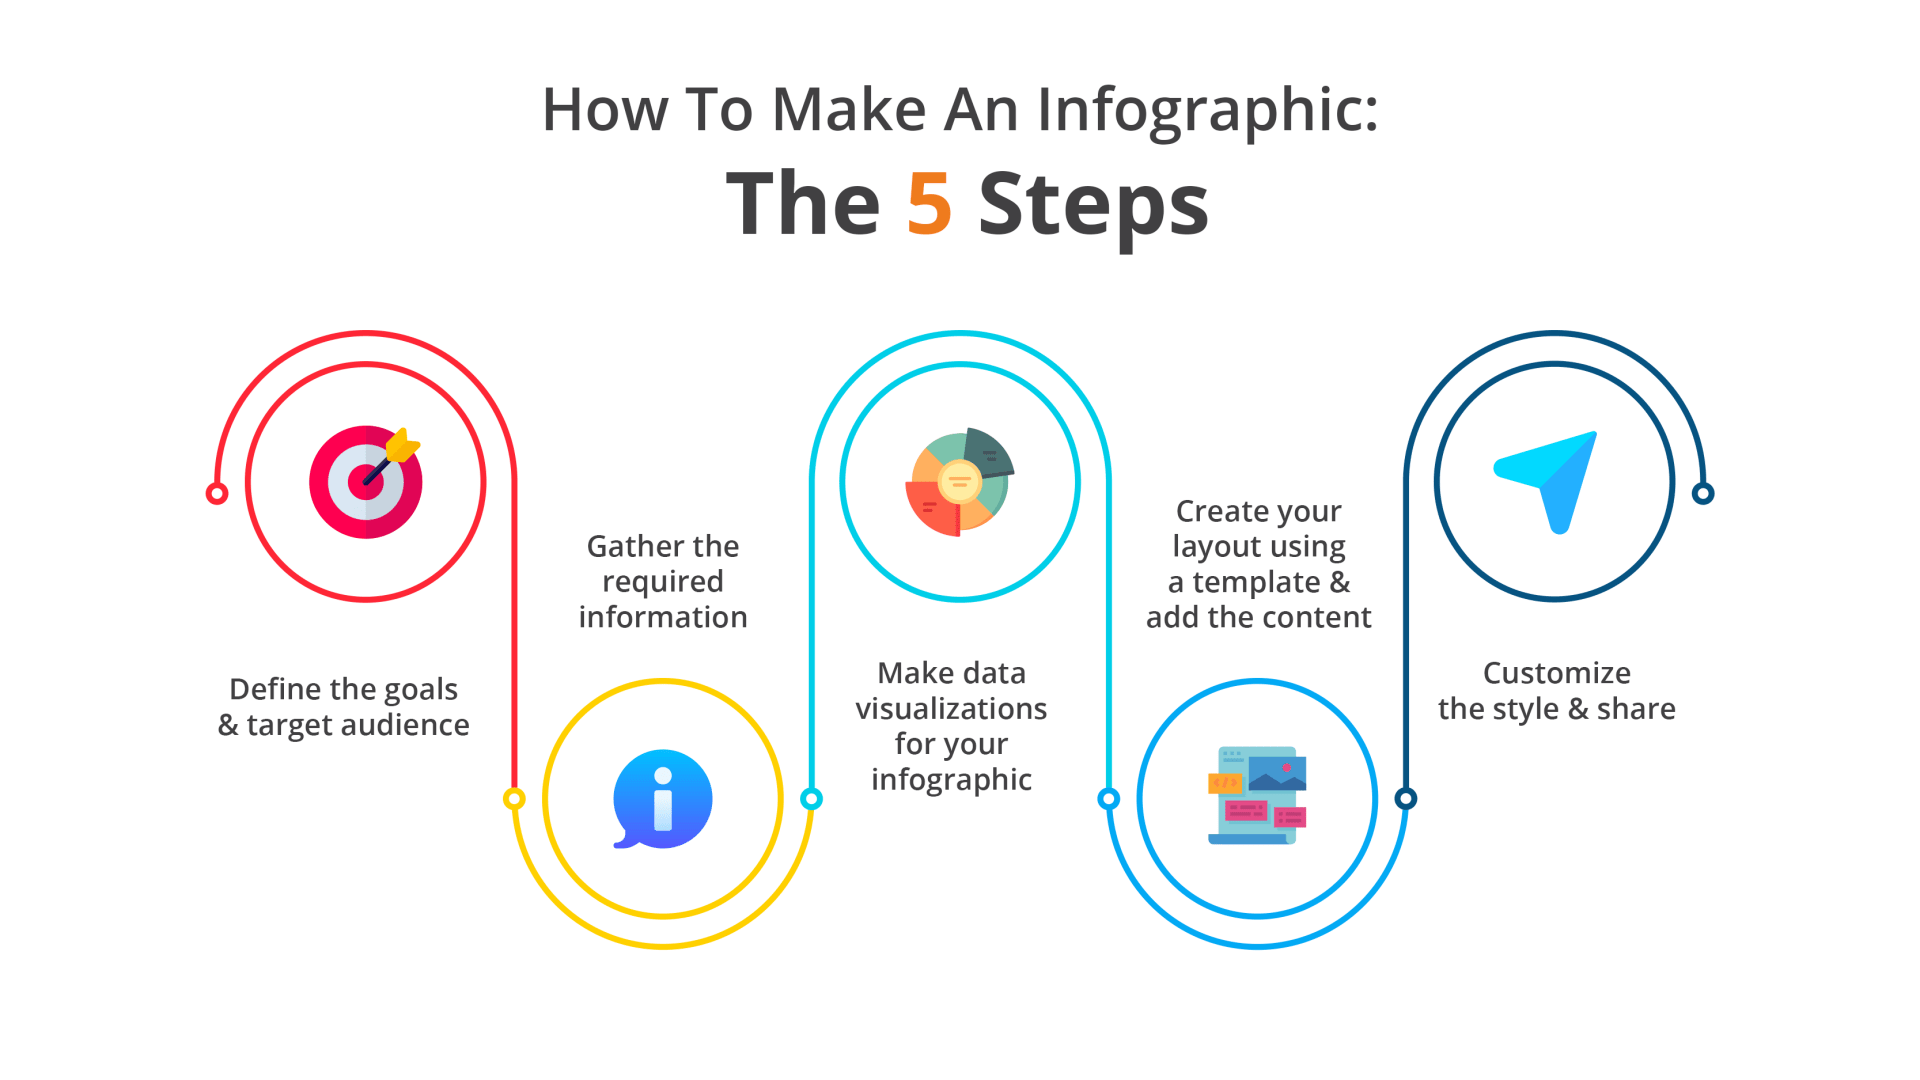 How to make an infographic in 5 steps